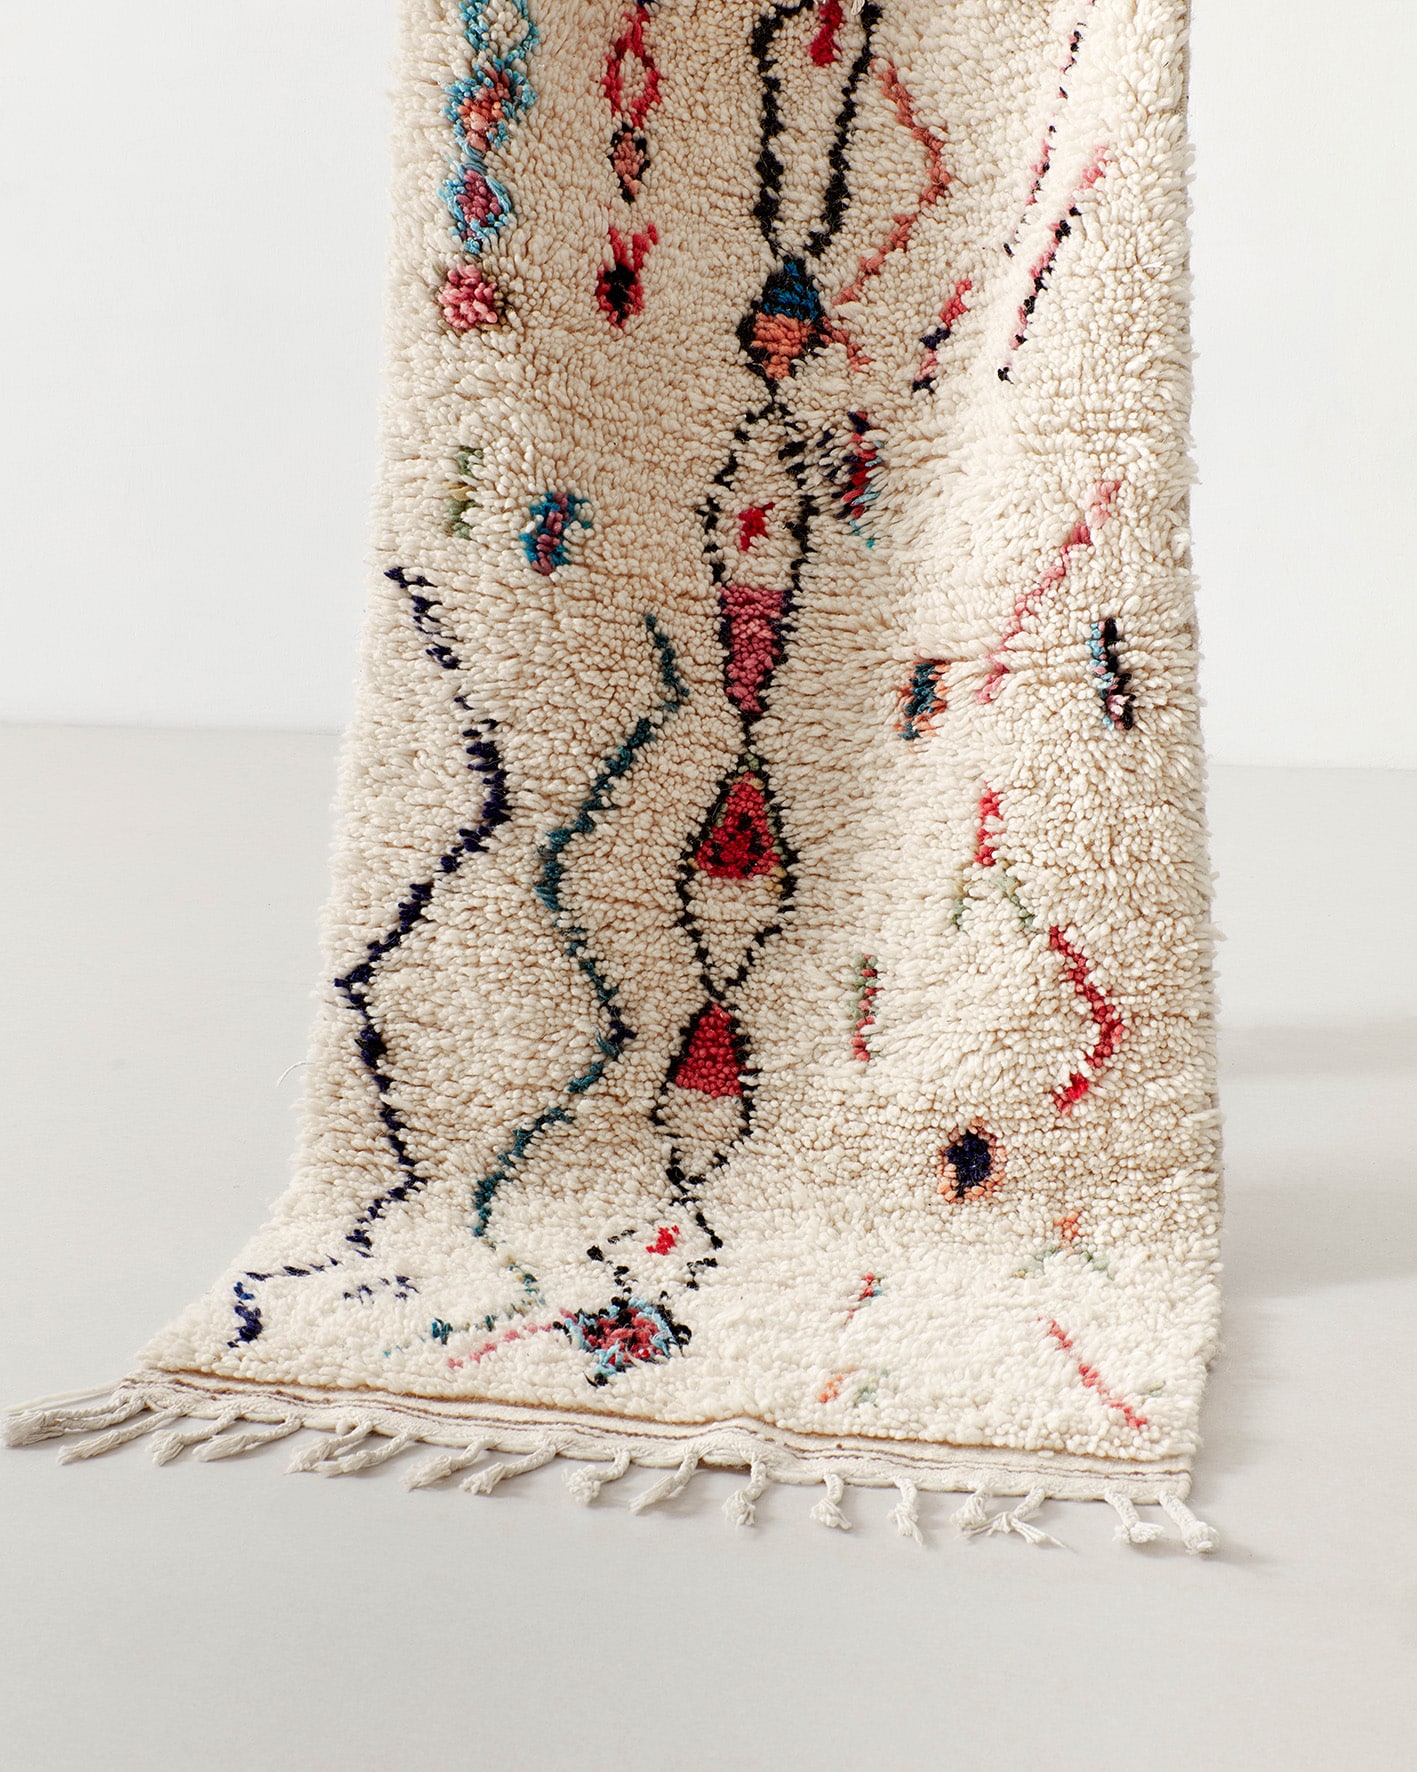 Tiny rug with abstract line drawings, texture